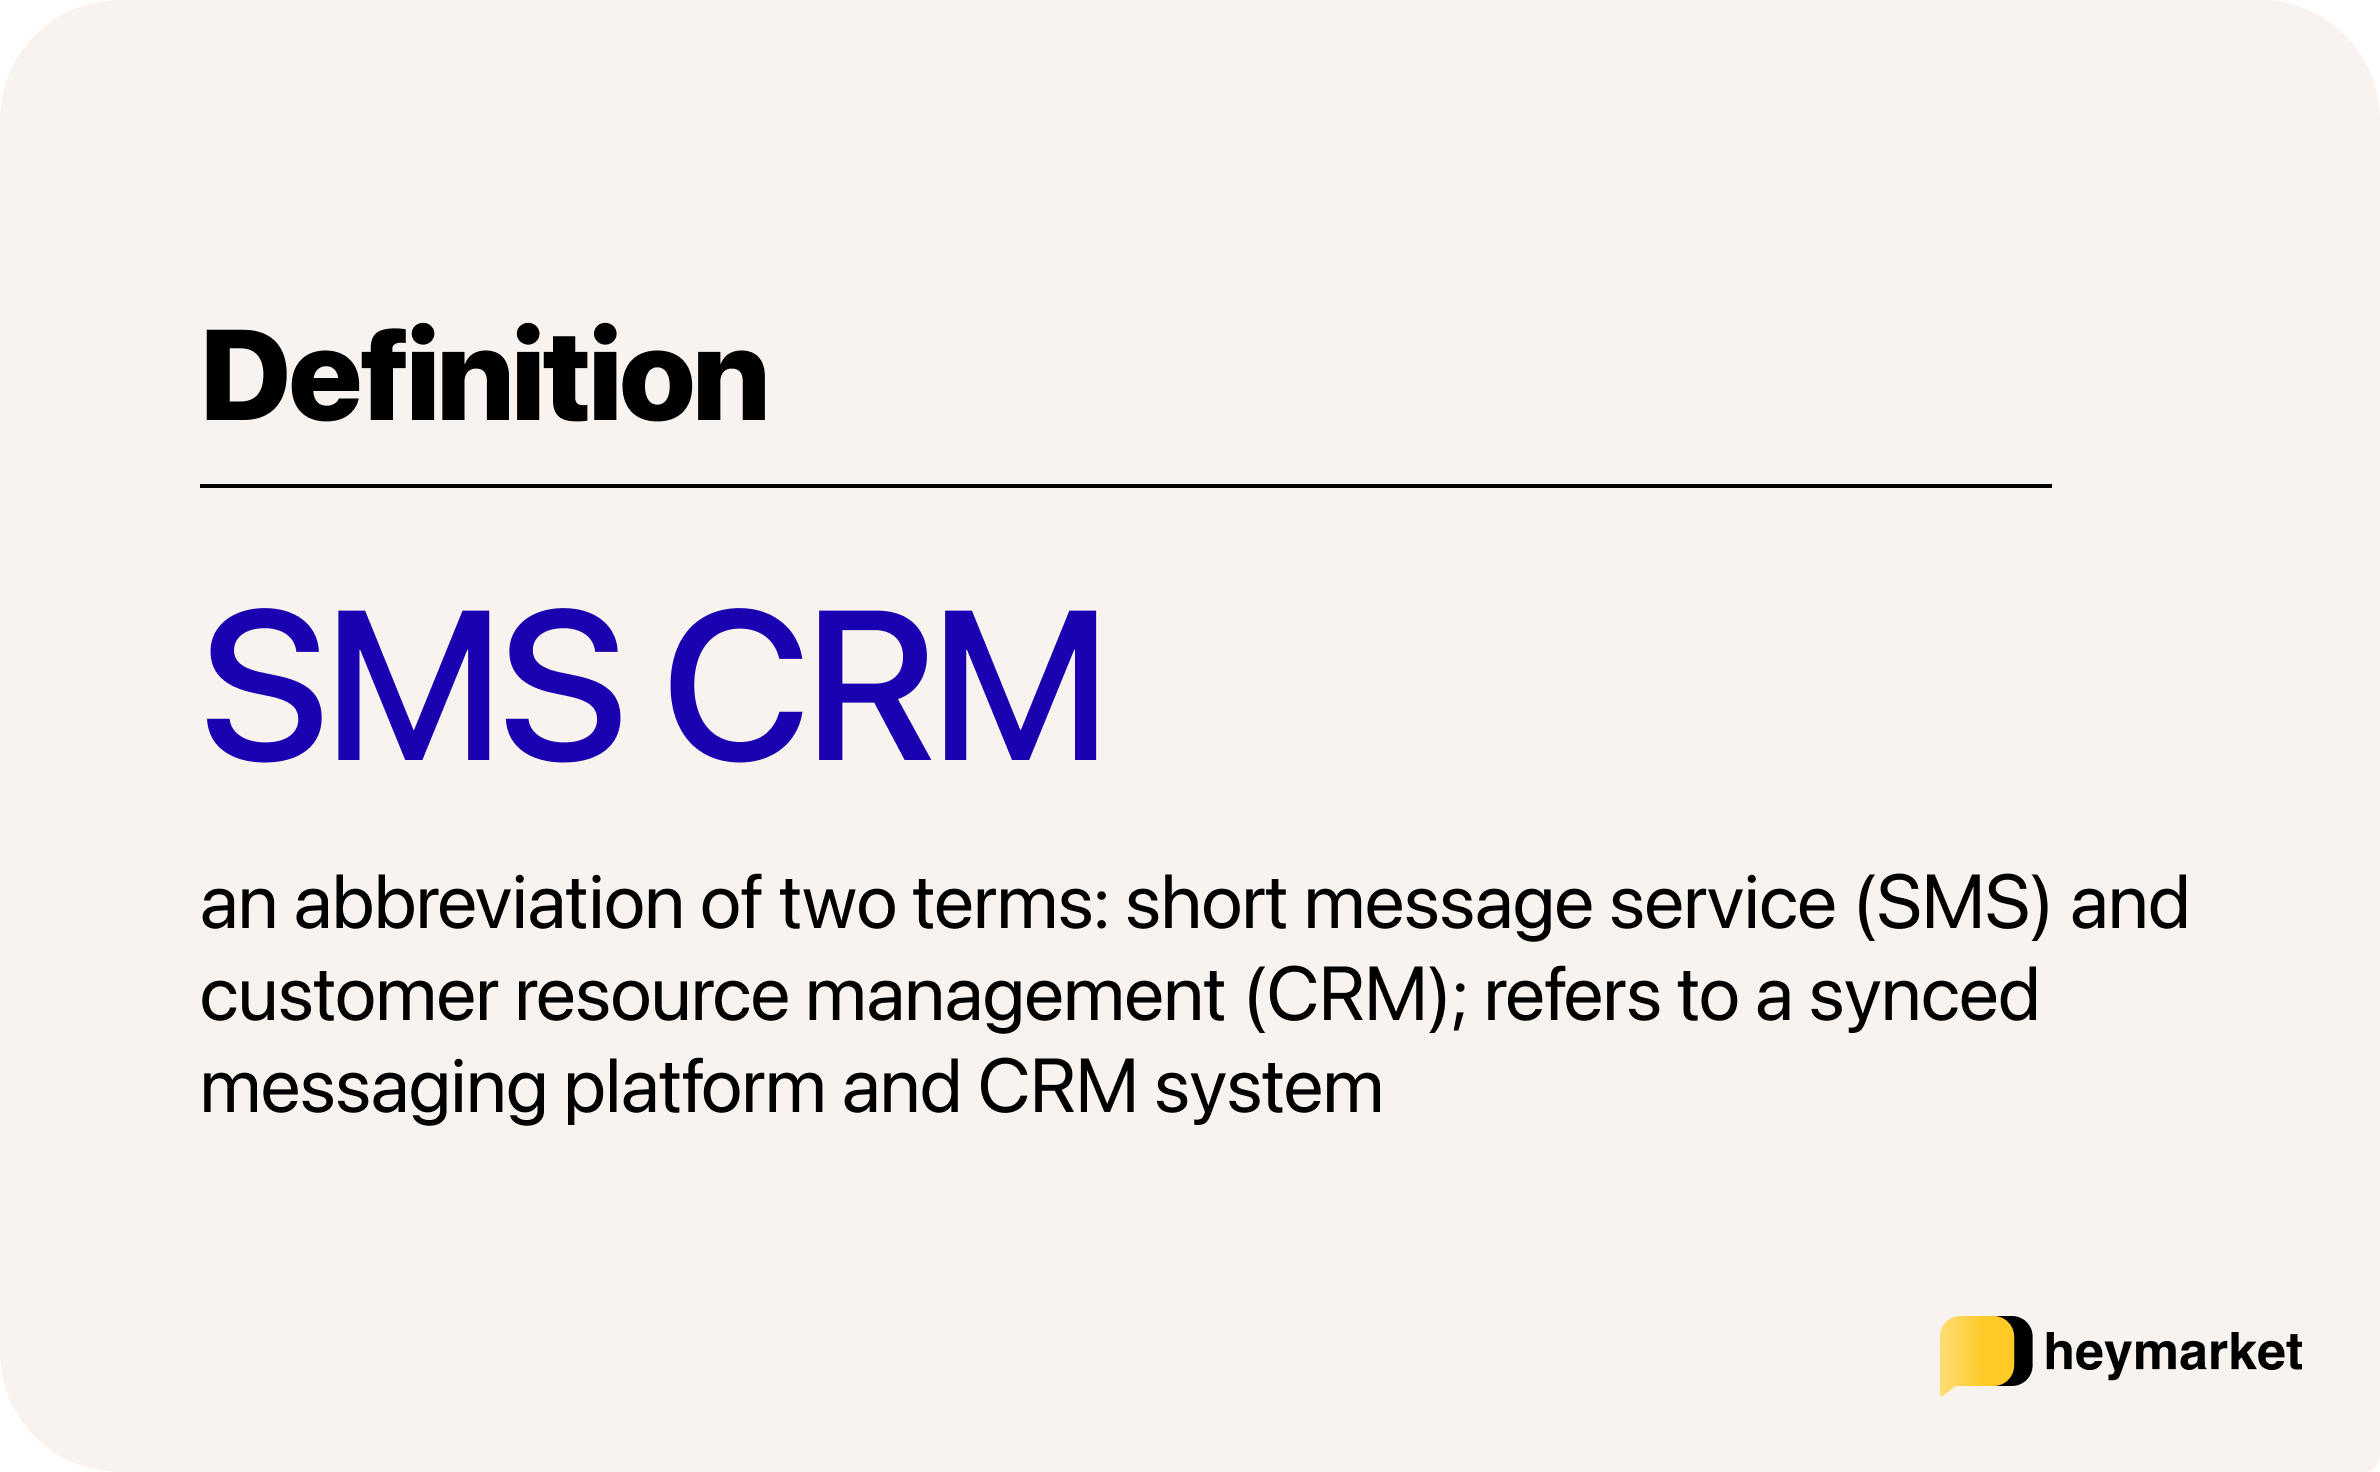 Definition of SMS CRM: an abbreviation of two terms: short messaging service (SMS), and customer relationship management (CRM). It refers to a synced messaging platform and CRM system